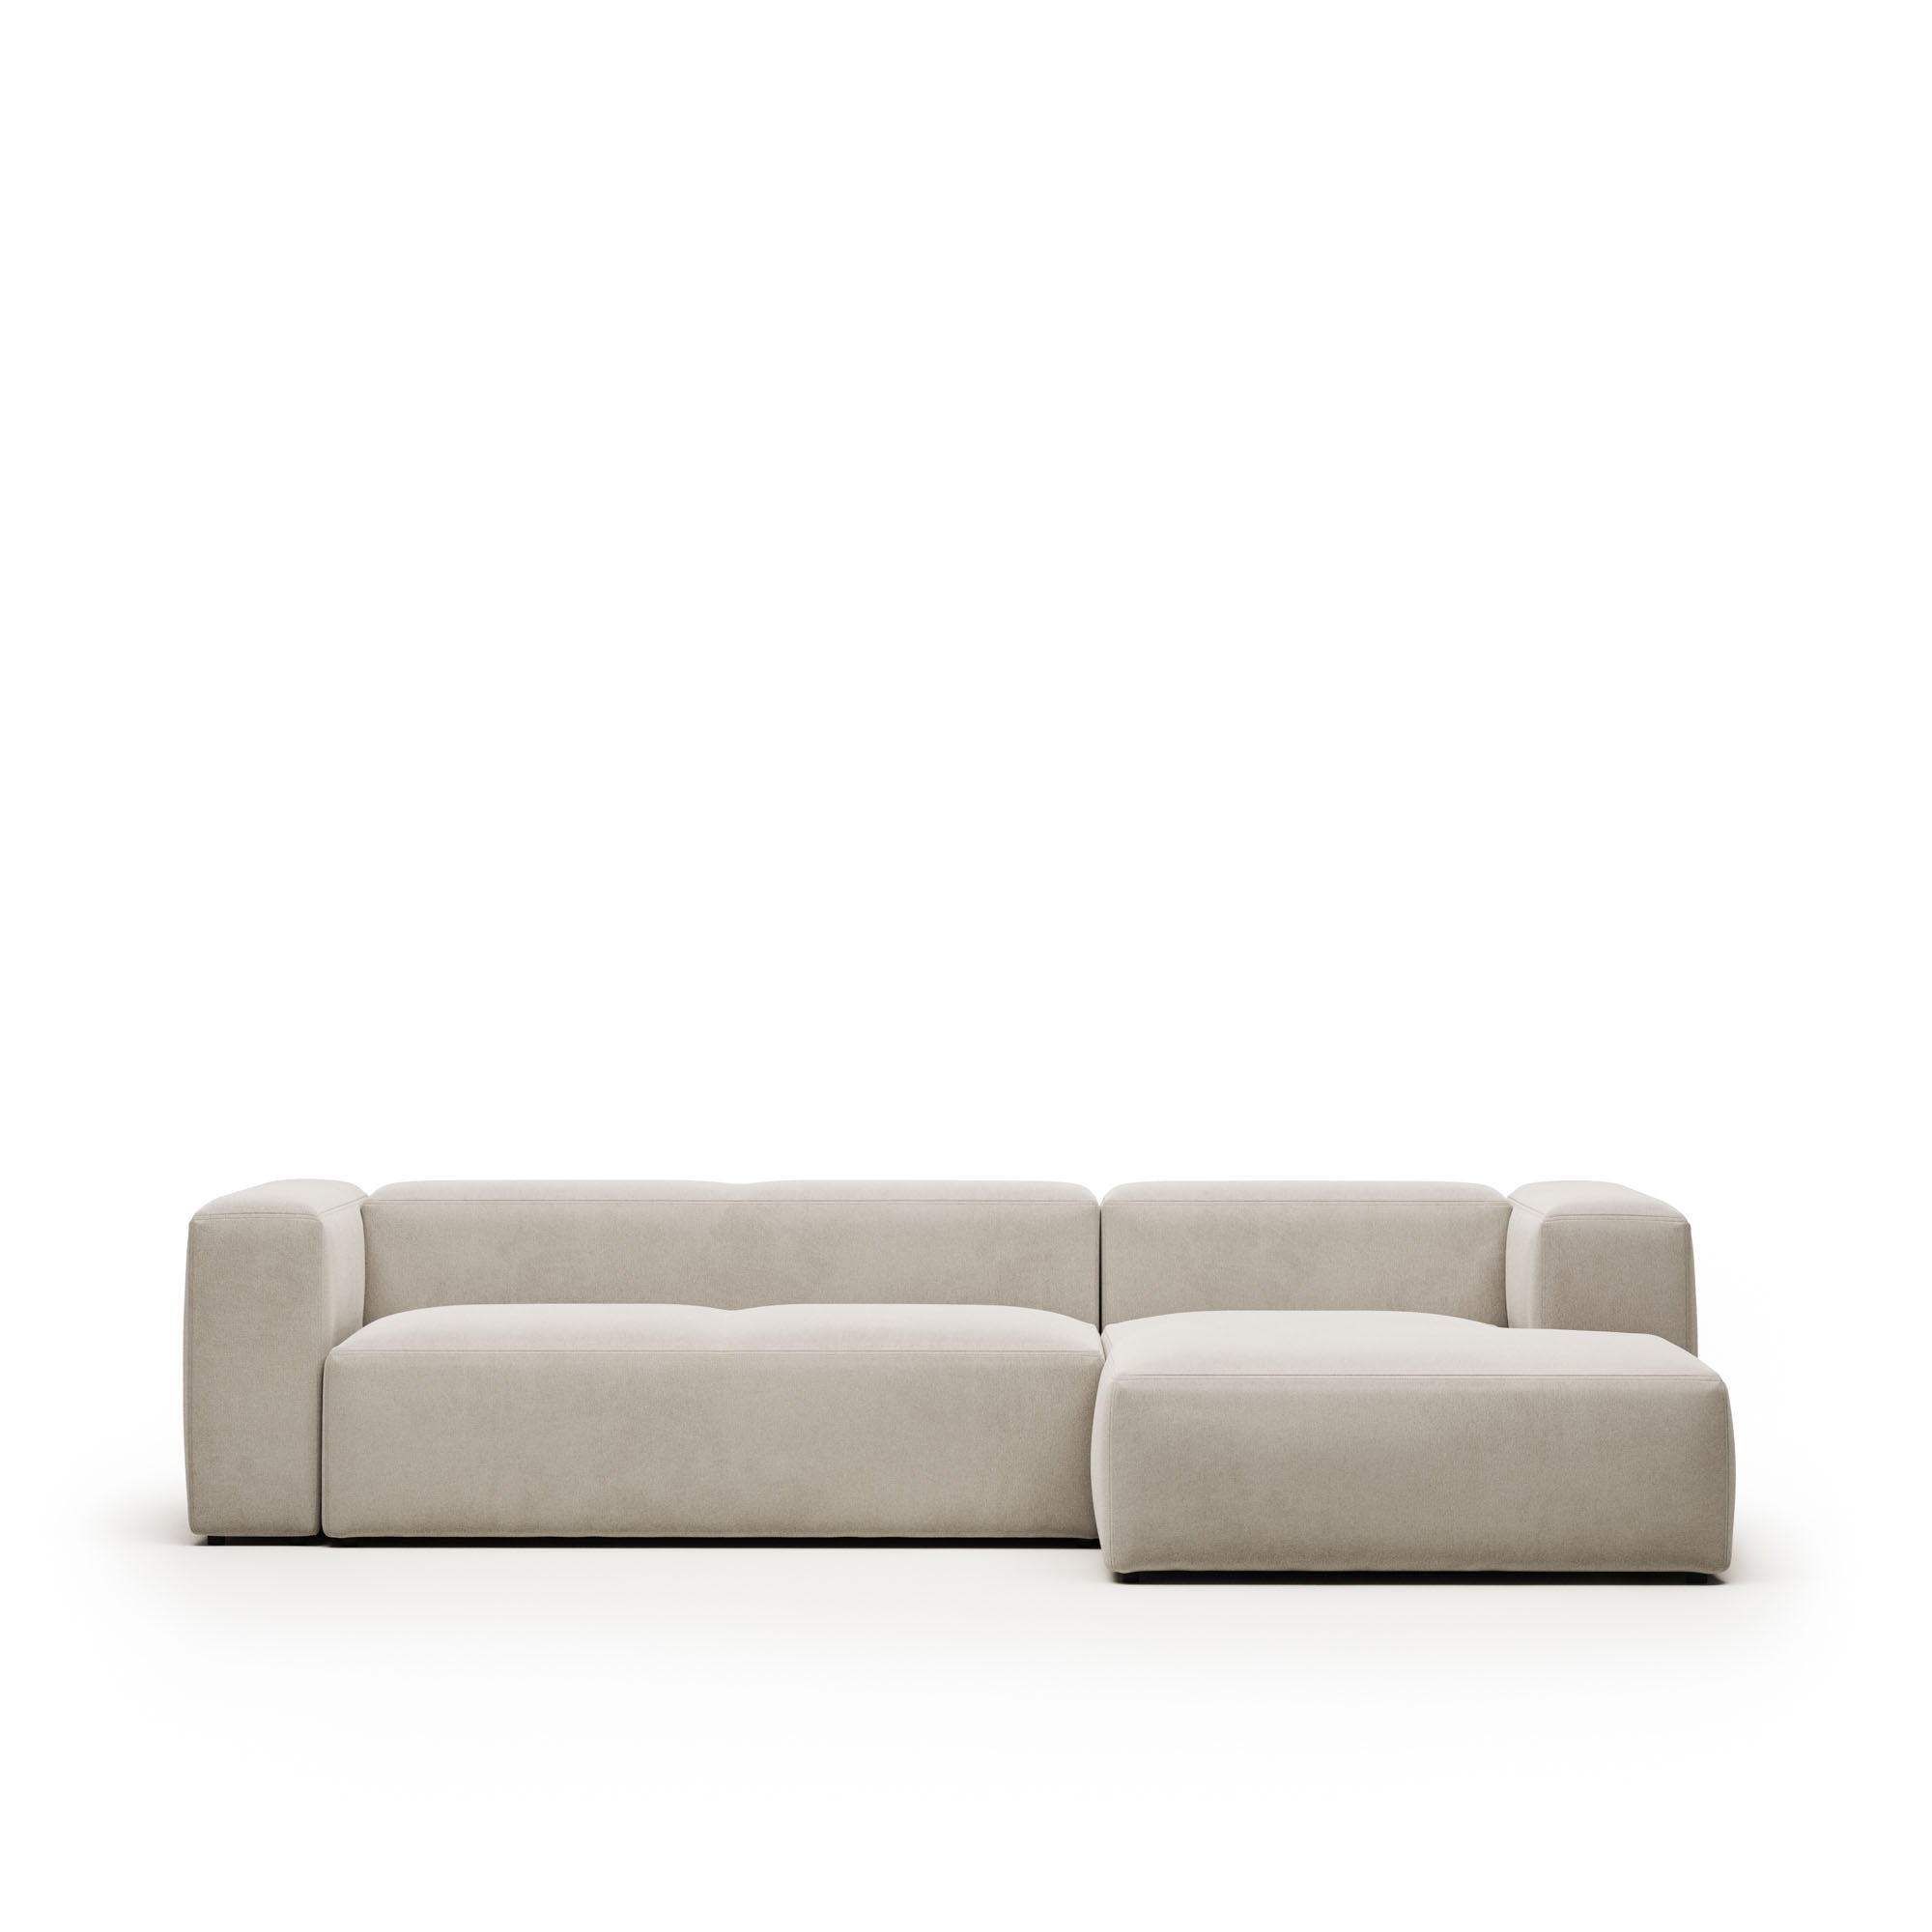 Blok 3-seater sofa with right side recliner, in white, 300 cm